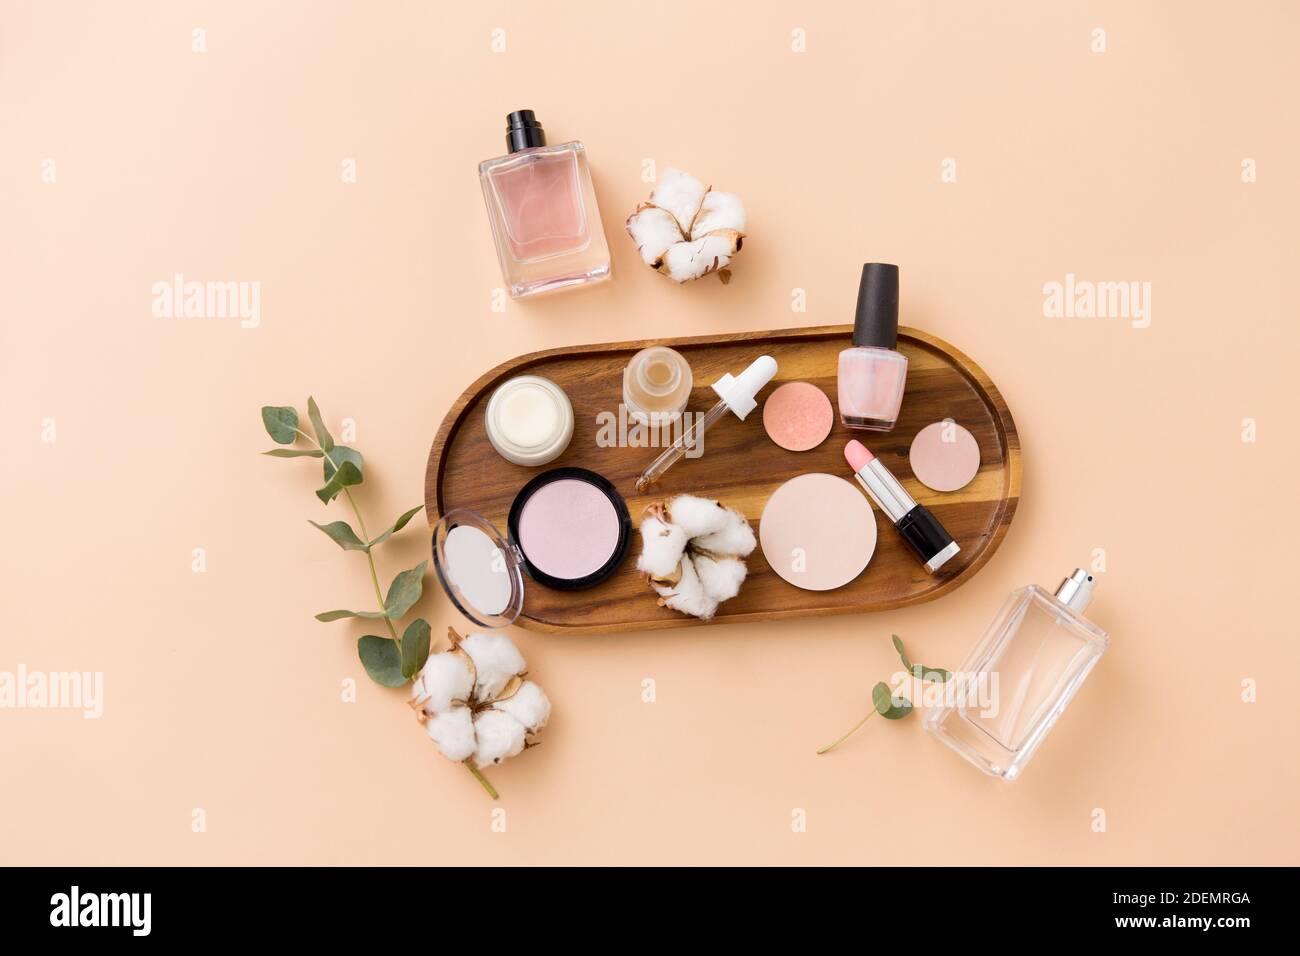 makeup, perfume and cosmetics on wooden tray Stock Photo